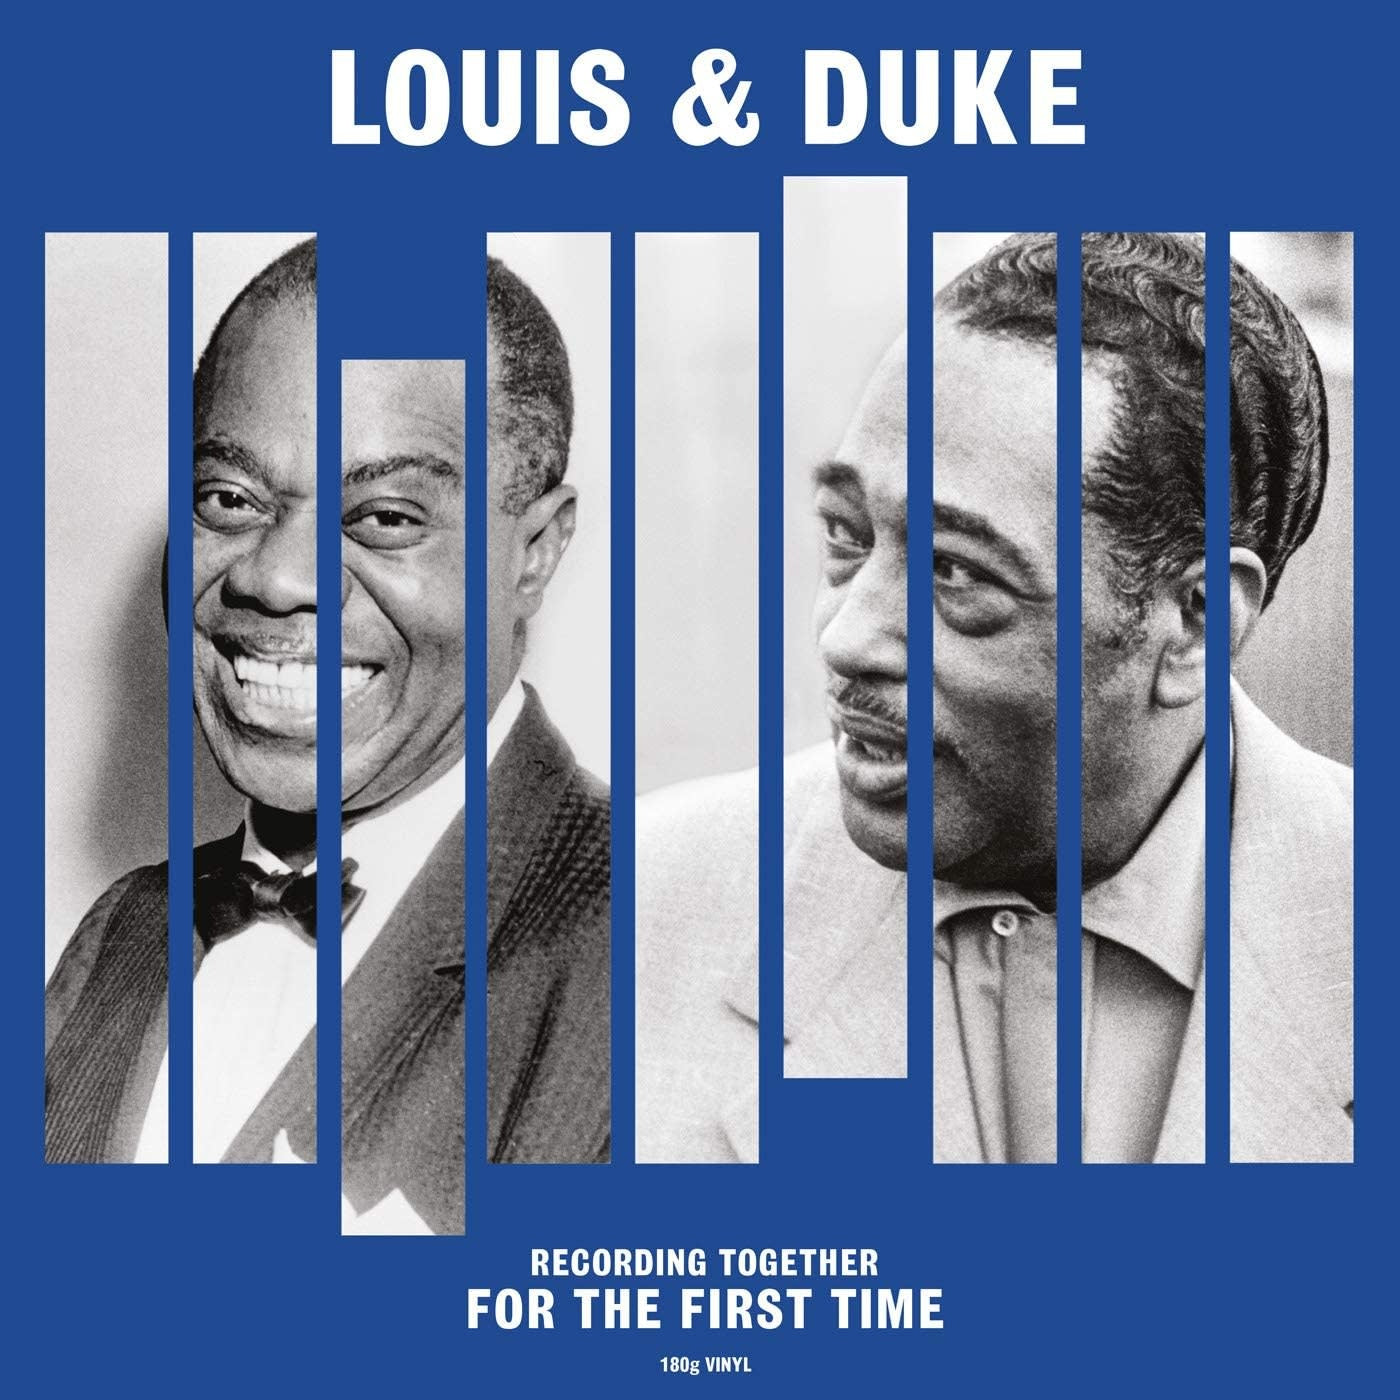 Louis Armstrong & Duke Ellington - Together For The First Time (Vinyl LP)